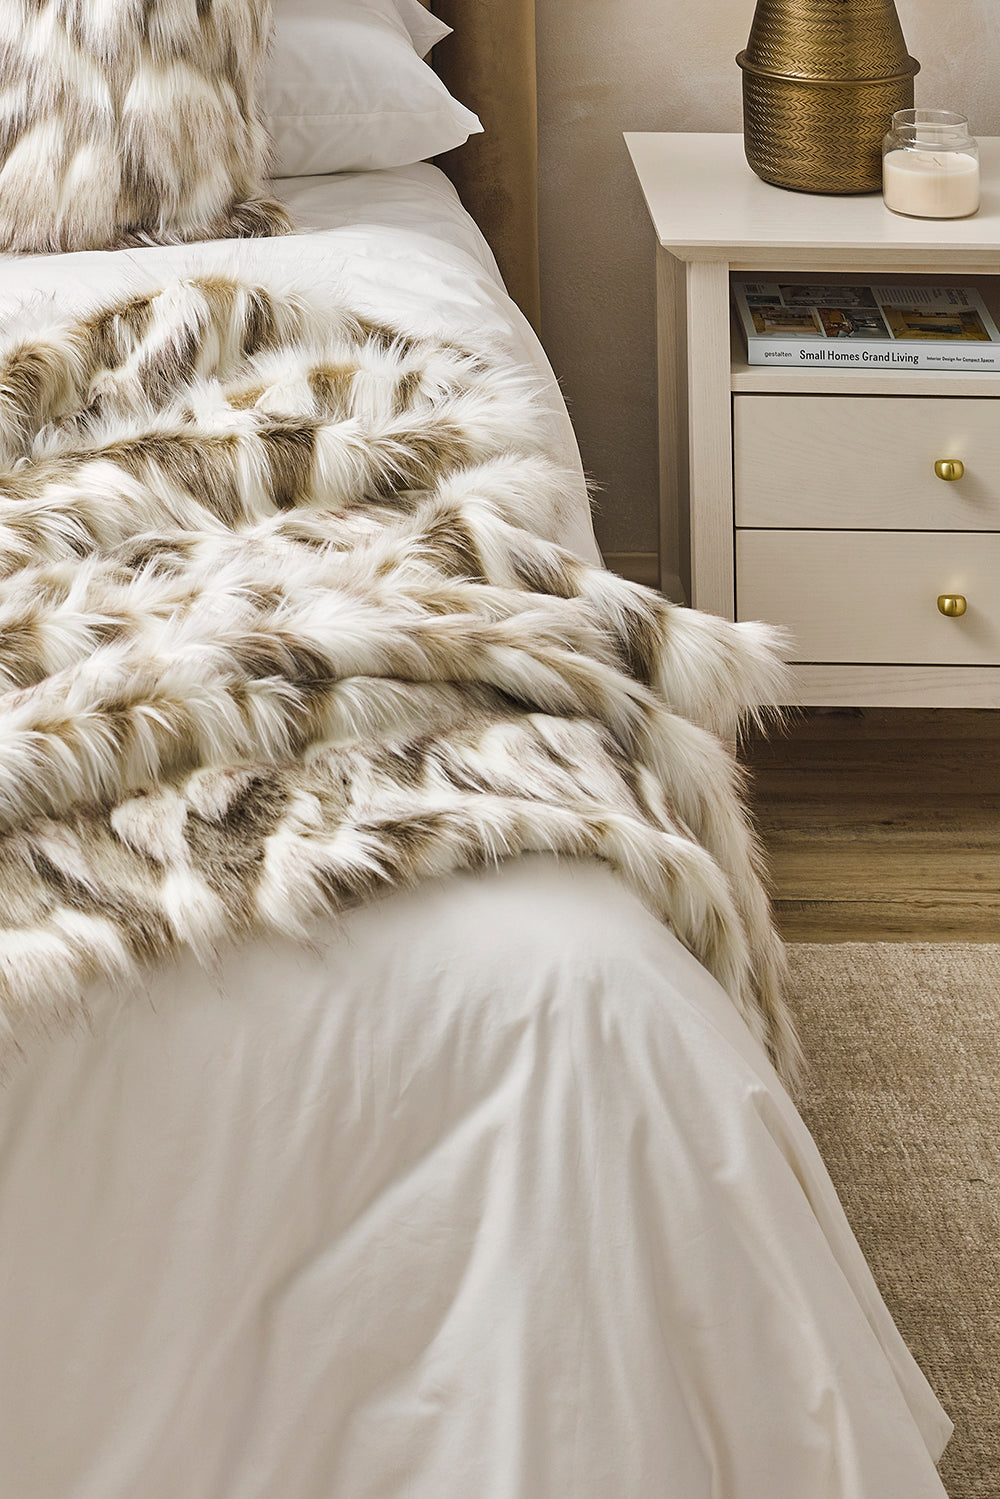 Luxury faux fur throw in cream and brown from Heirloom.  These are the best fake fur throws, super soft for NZ interior design. Snowhare.